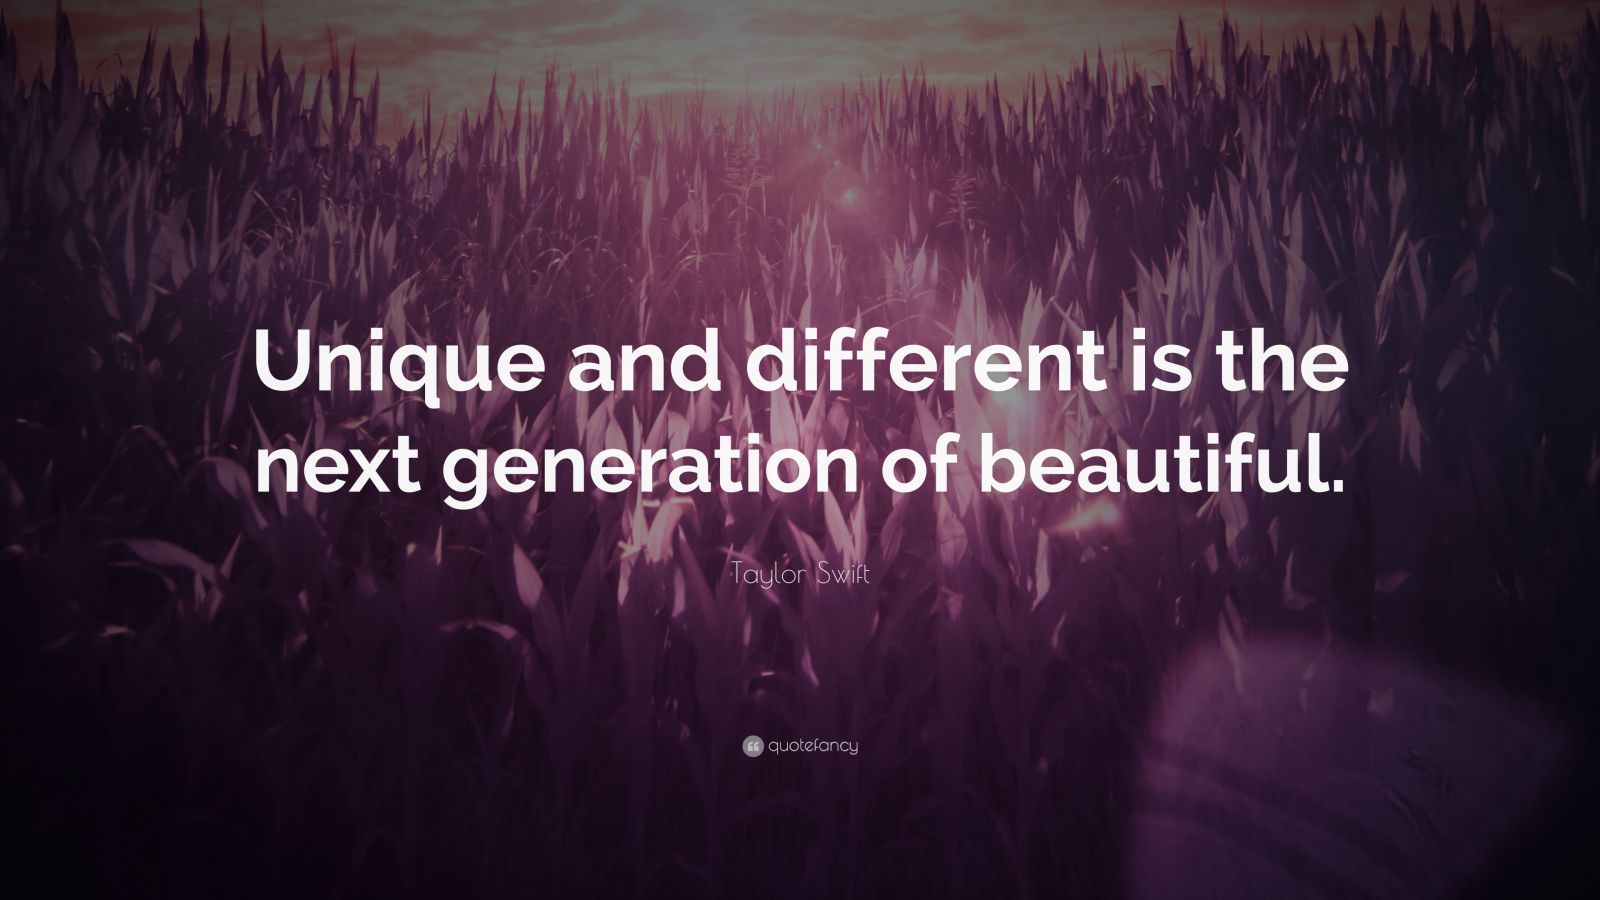 Unique and different is the next generation of beautiful.